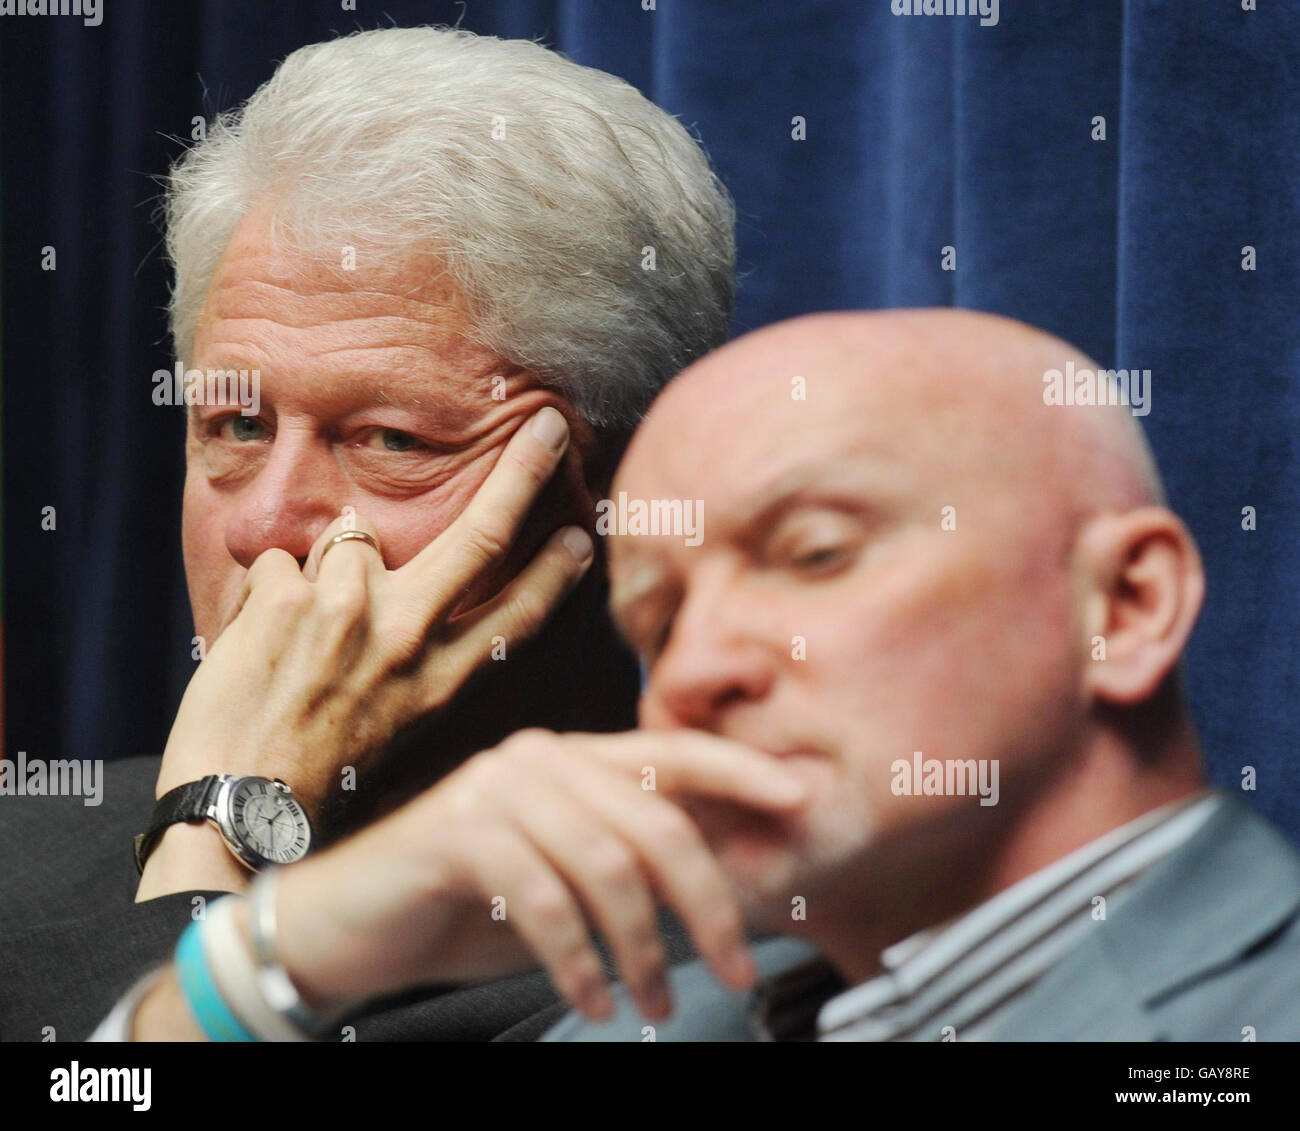 President Bill Clinton shares a platform with Sir Tom Hunter at the Department for International Development in London today where they announced a new partnership to end rural poverty in Rwanda and Malawi. Stock Photo